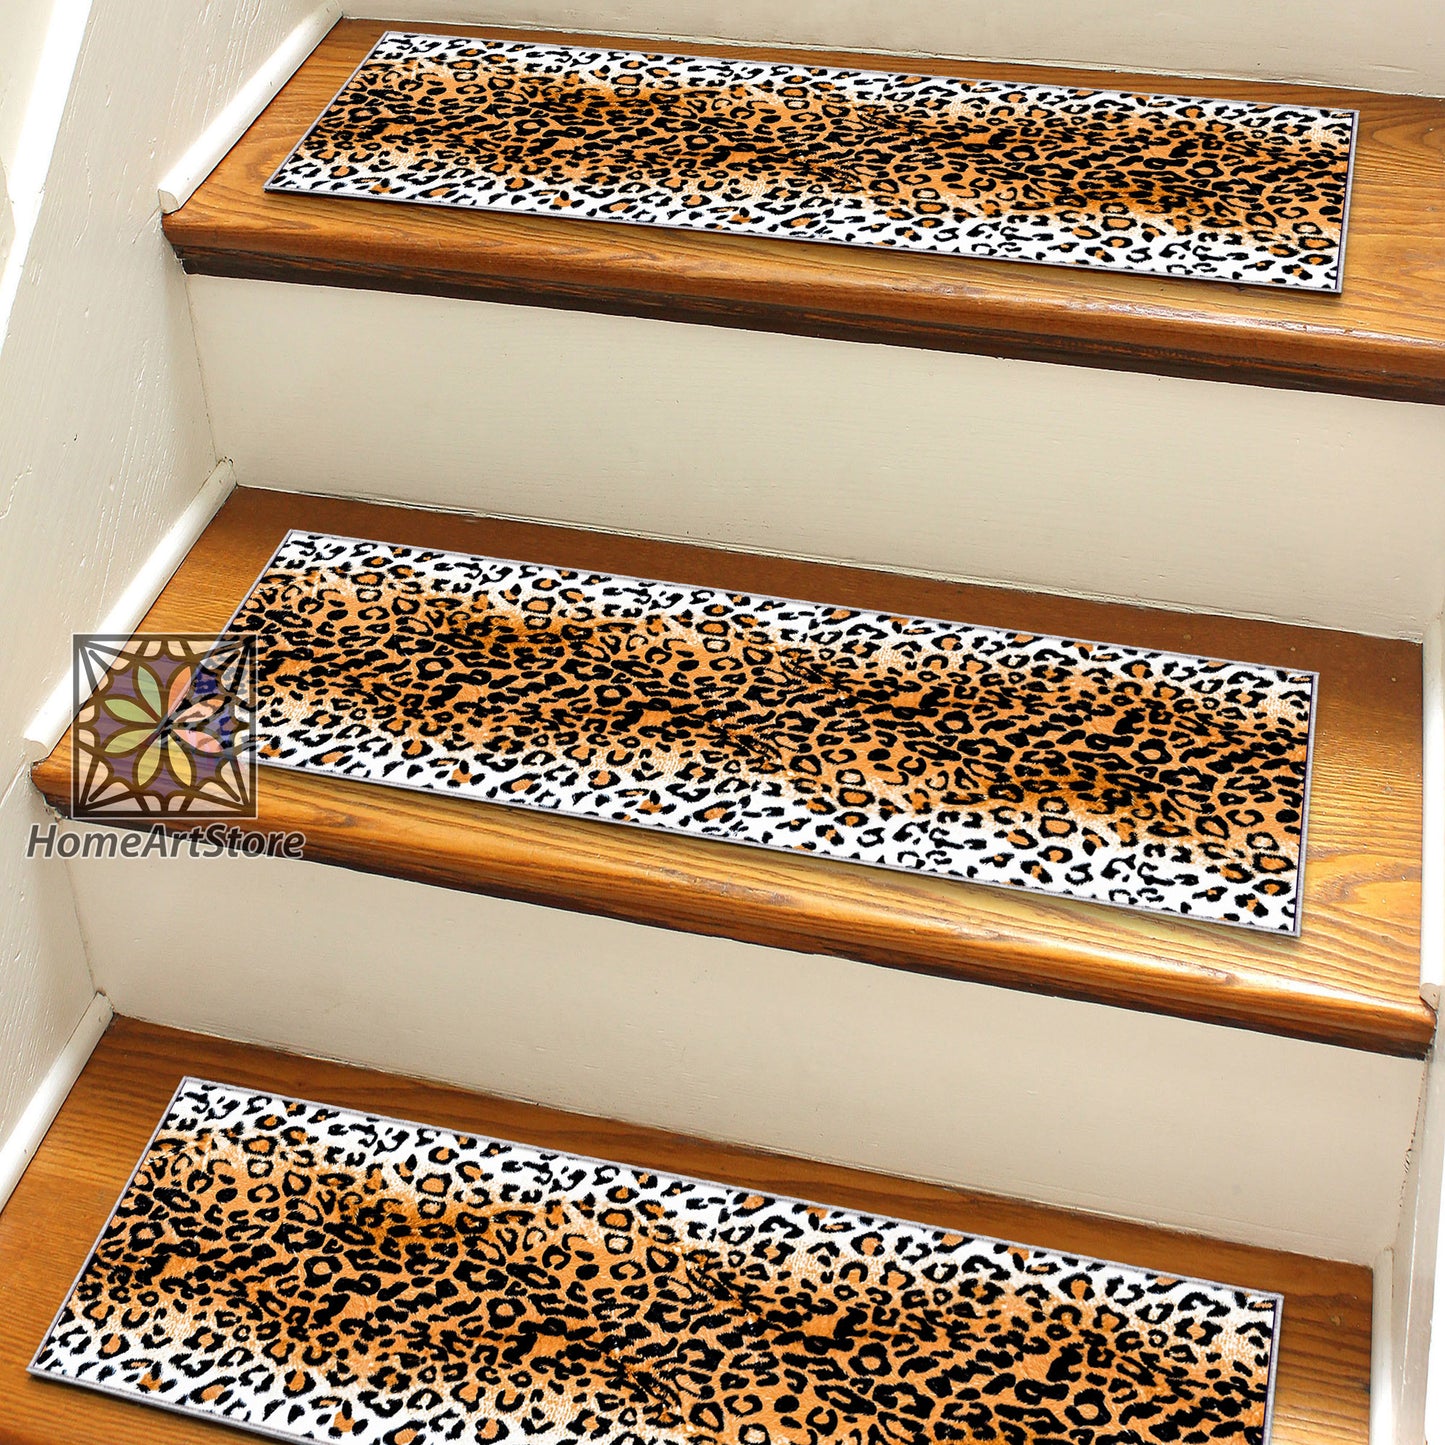 Leopard Patterned Stair Step Rugs, Office Stair Step Mats, Nonslip Area Mats, Decorative Home Decor